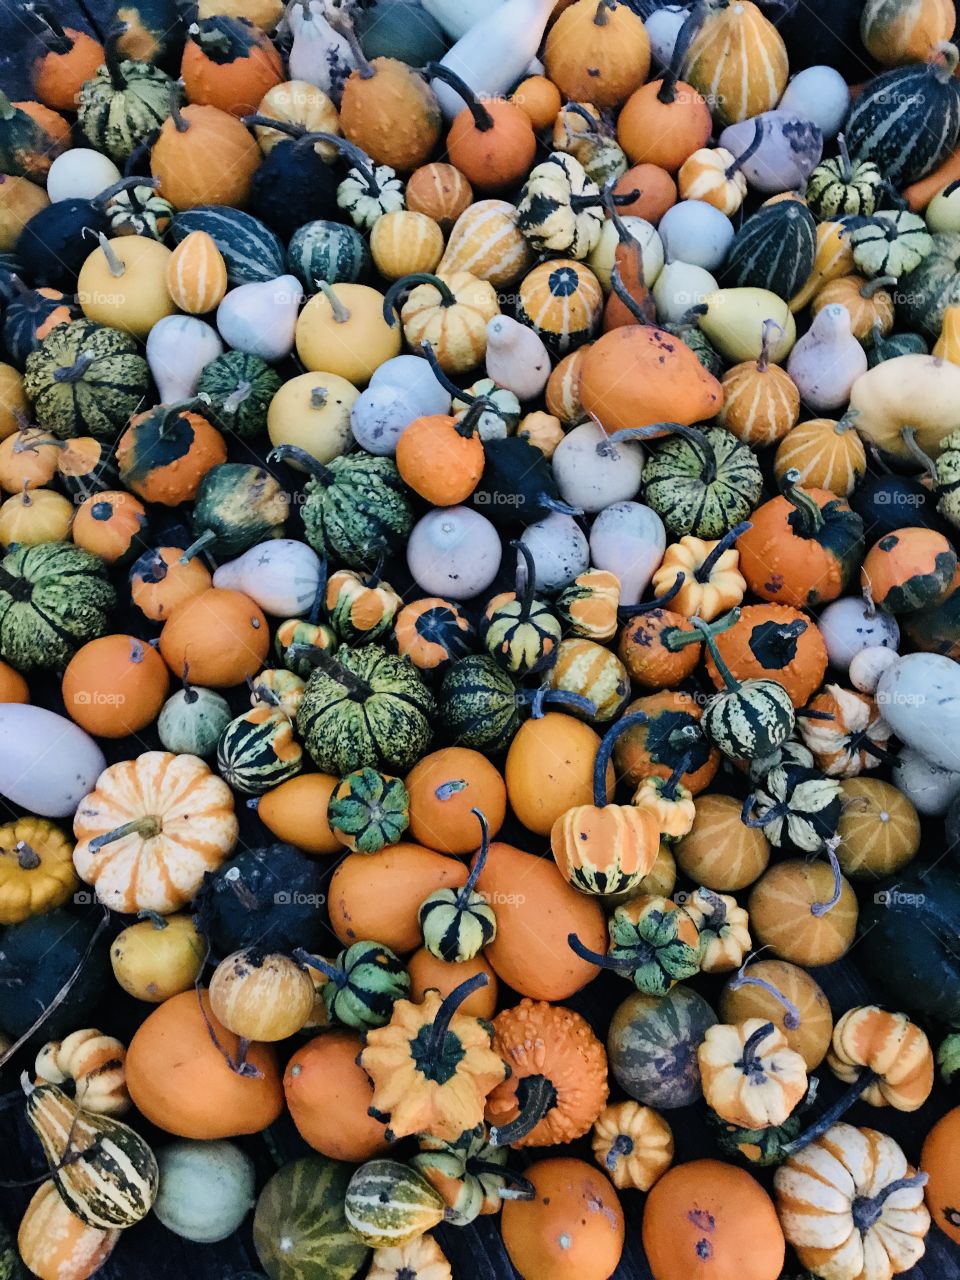 Gourds galore!  It’s fall!